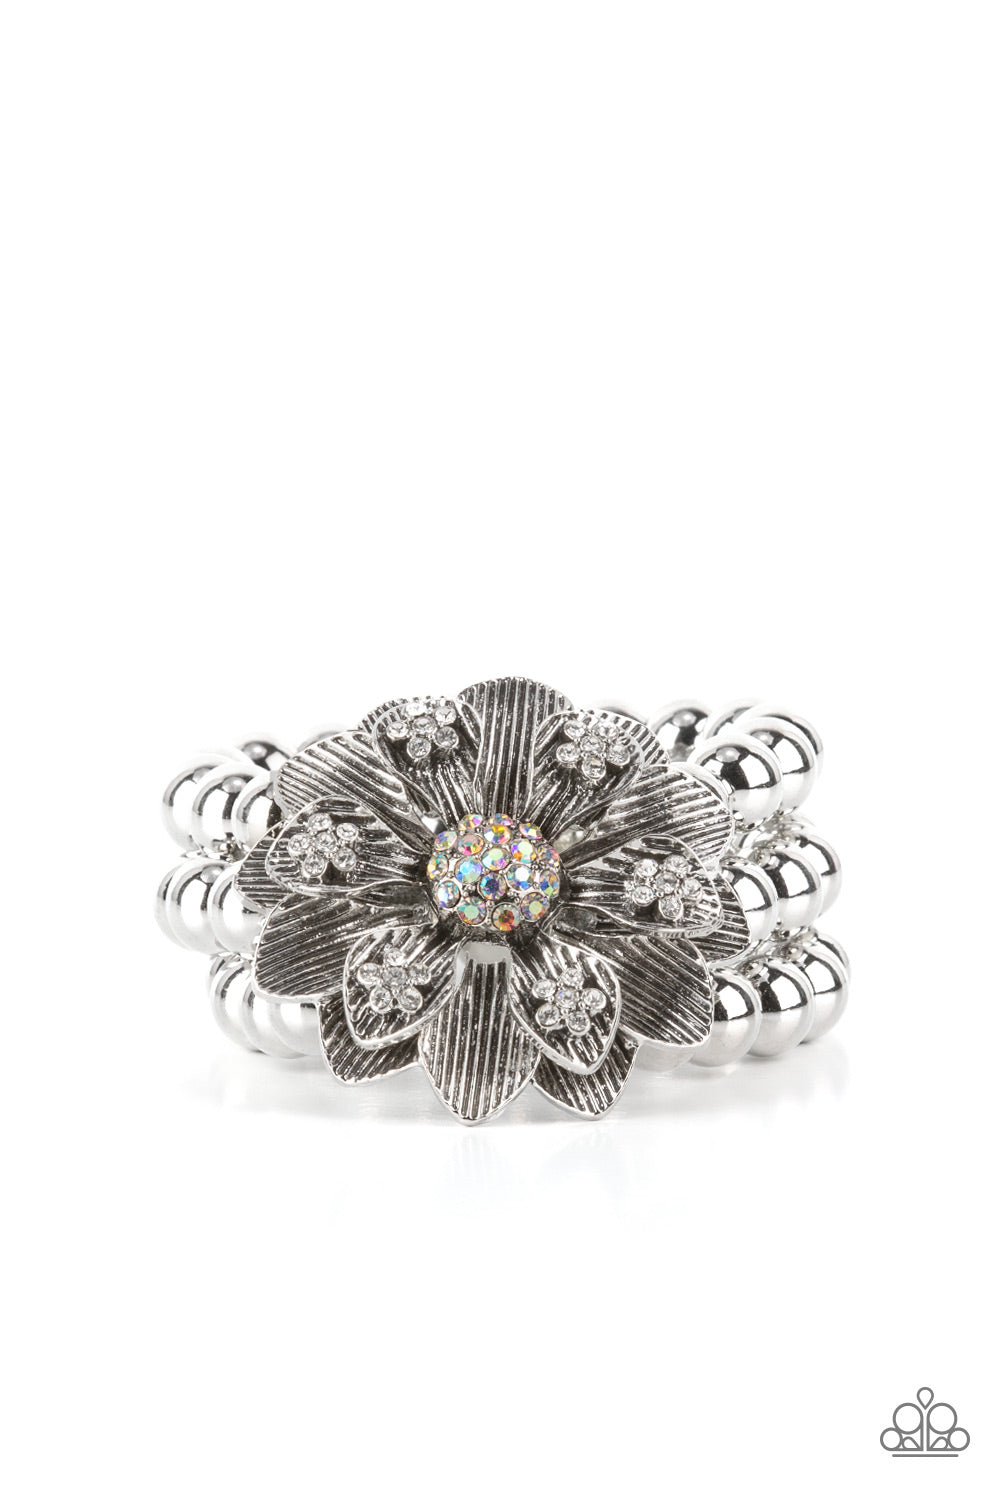 Botanical Bravado Multi Bracelet - Paparazzi Accessories  A daring oversized silver flower is composed of petals lined in antiqued silver and dotted with glistening dainty white rhinestones. A sphere of dainty iridescent rhinestones creates the center of the flower as it sits atop a trio of shiny silver beaded stretchy bands around the wrist for a dramatically whimsical look.  Sold as one individual bracelet.